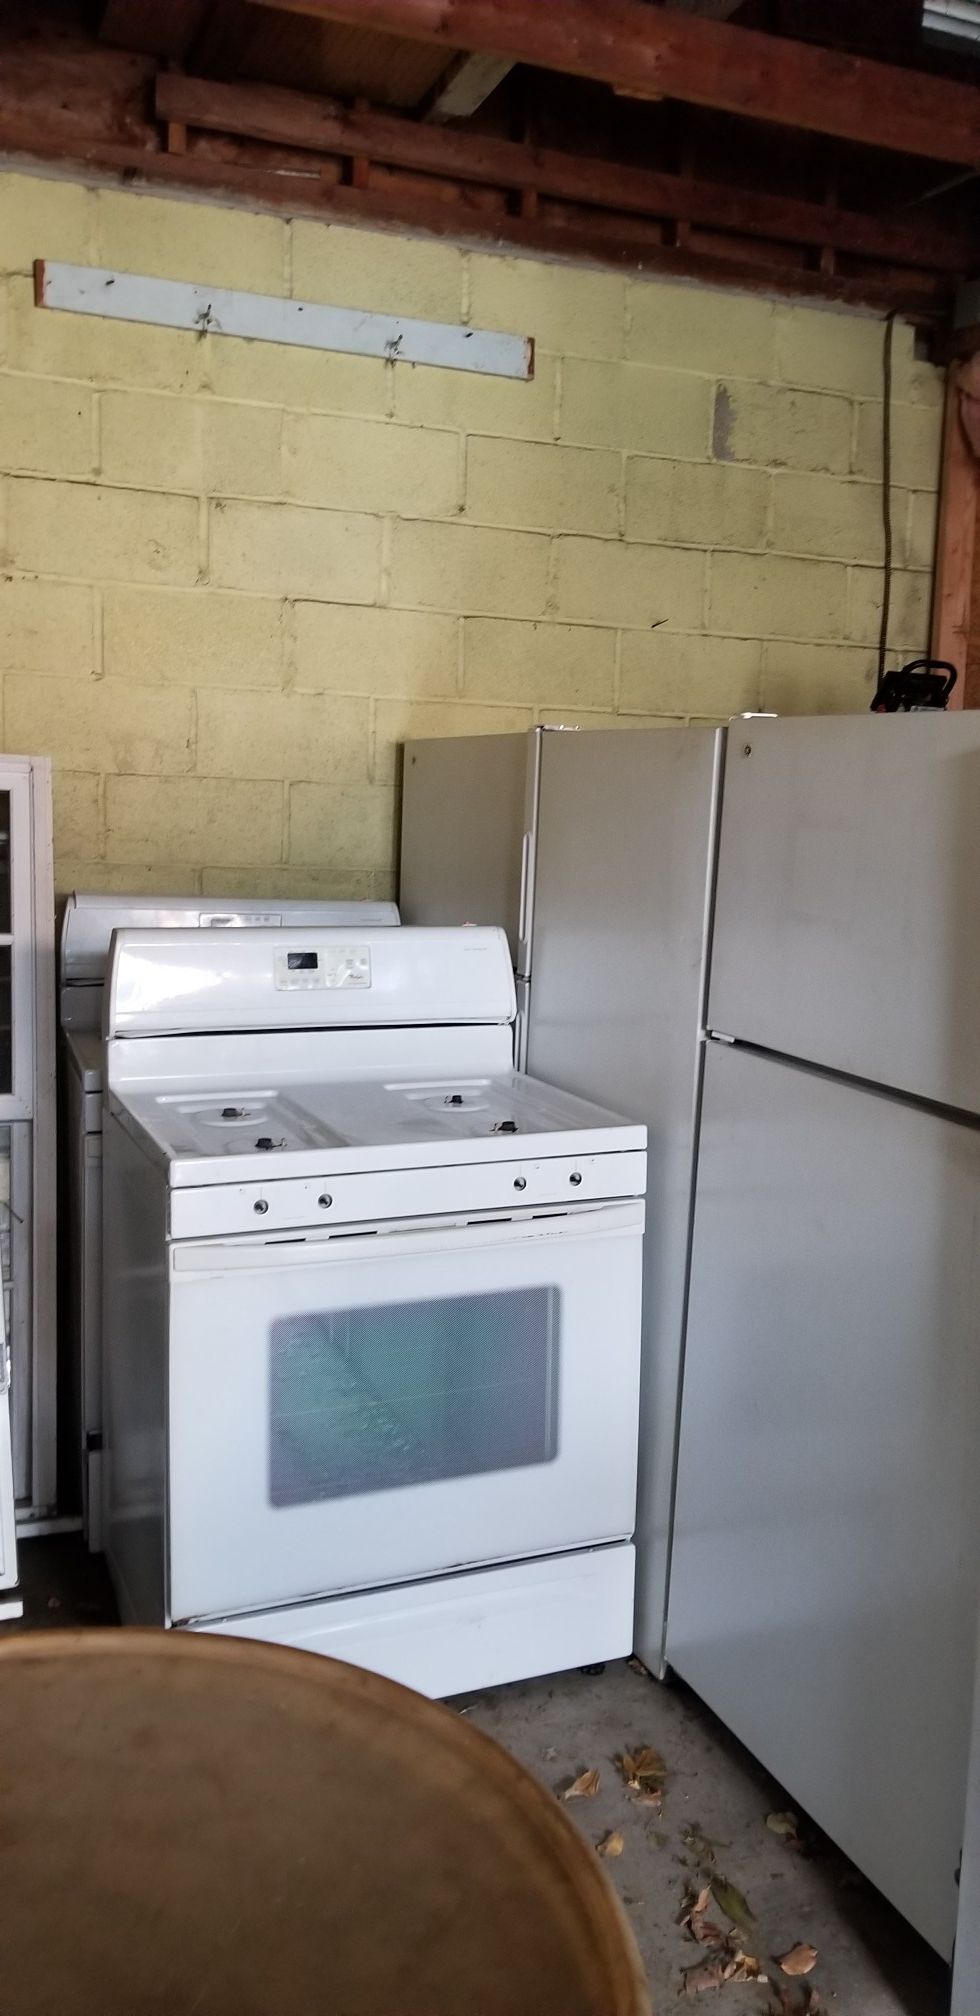 We have hotpoint refrigerator and stoves perfect for rental properties in good condition $200 each